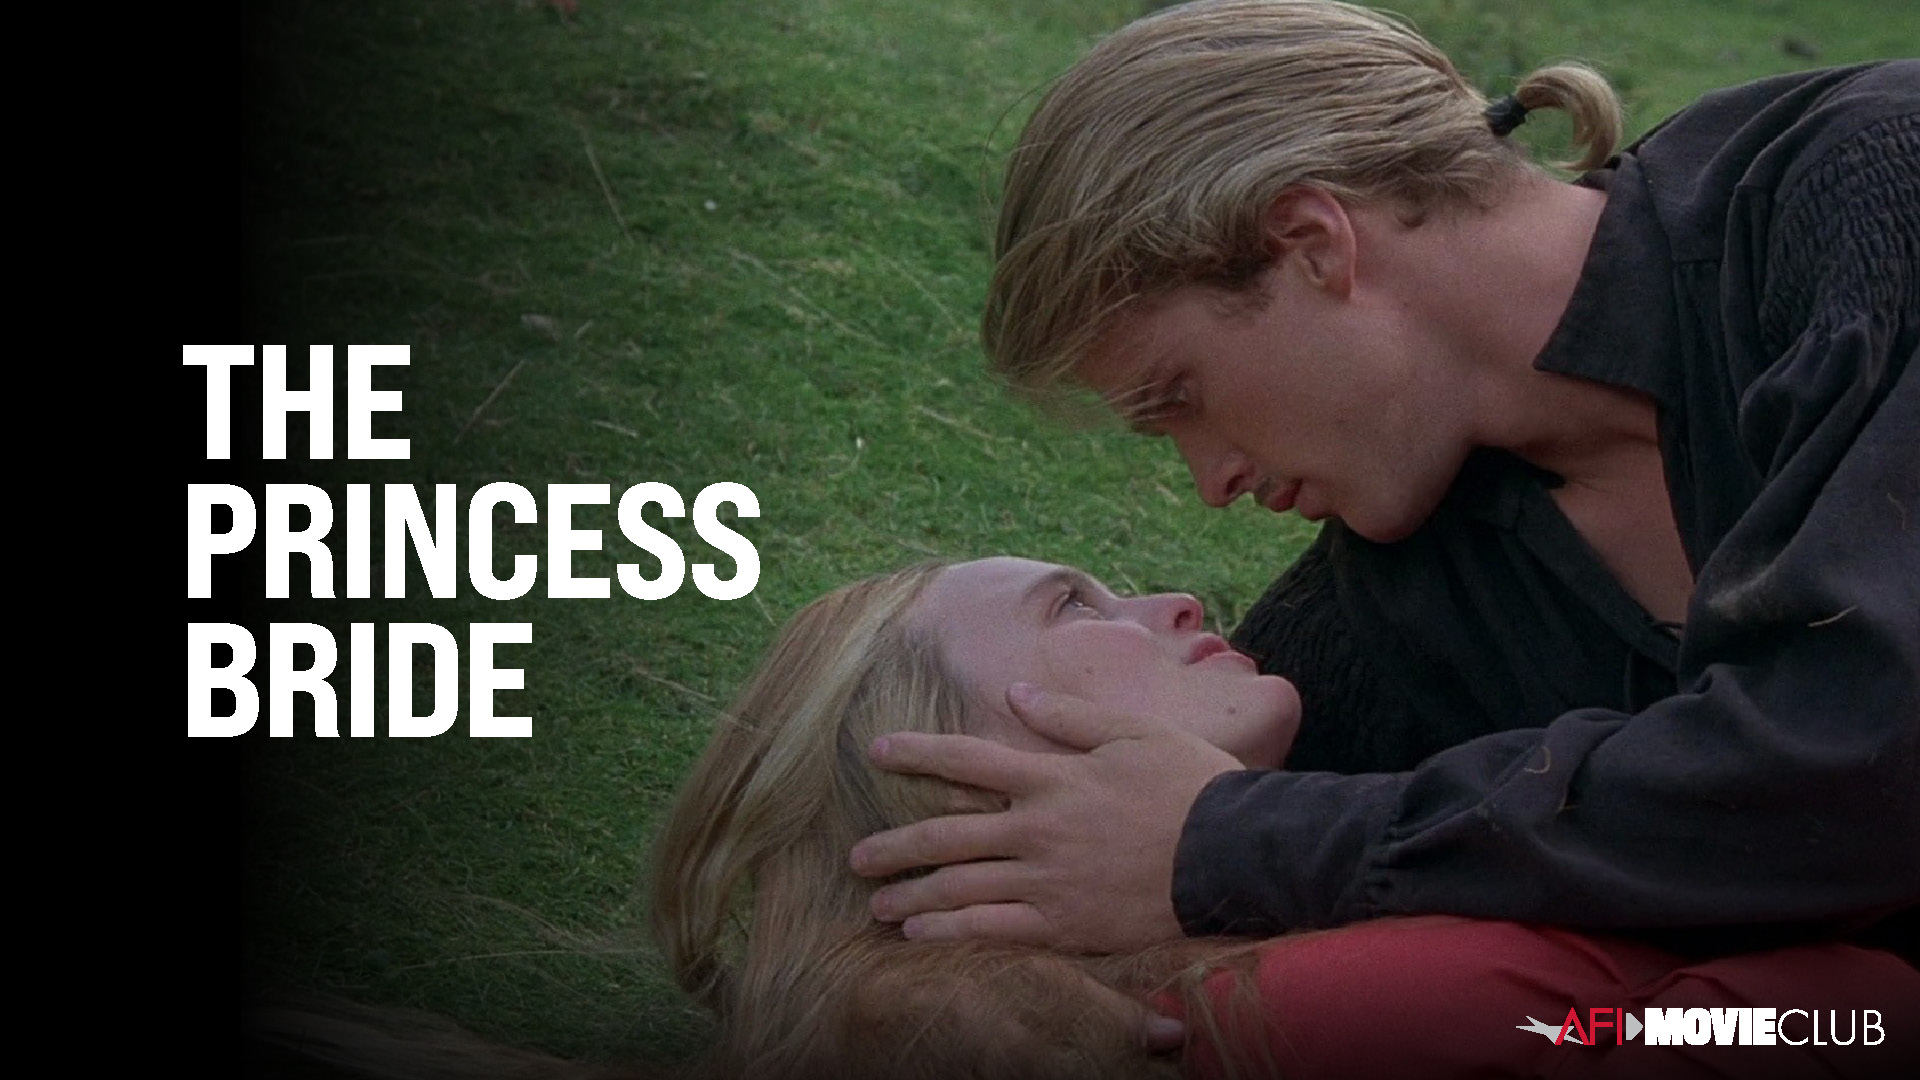 The Princess Bride Film Still - Cary Elwes and Robin Wright